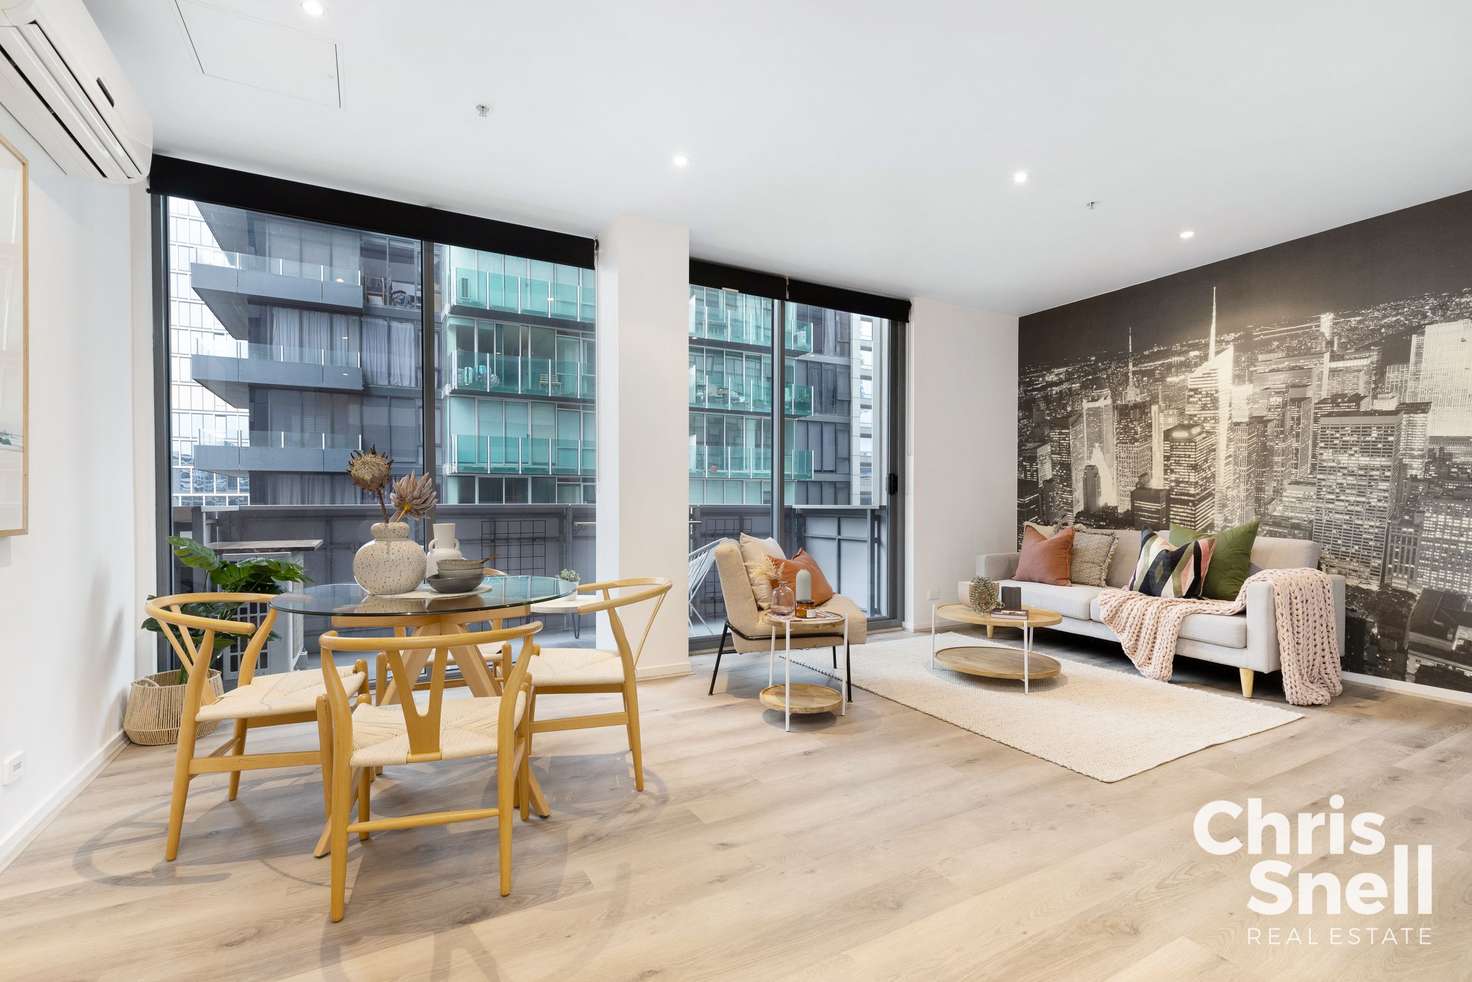 Main view of Homely apartment listing, 905/25 Wills Street, Melbourne VIC 3000